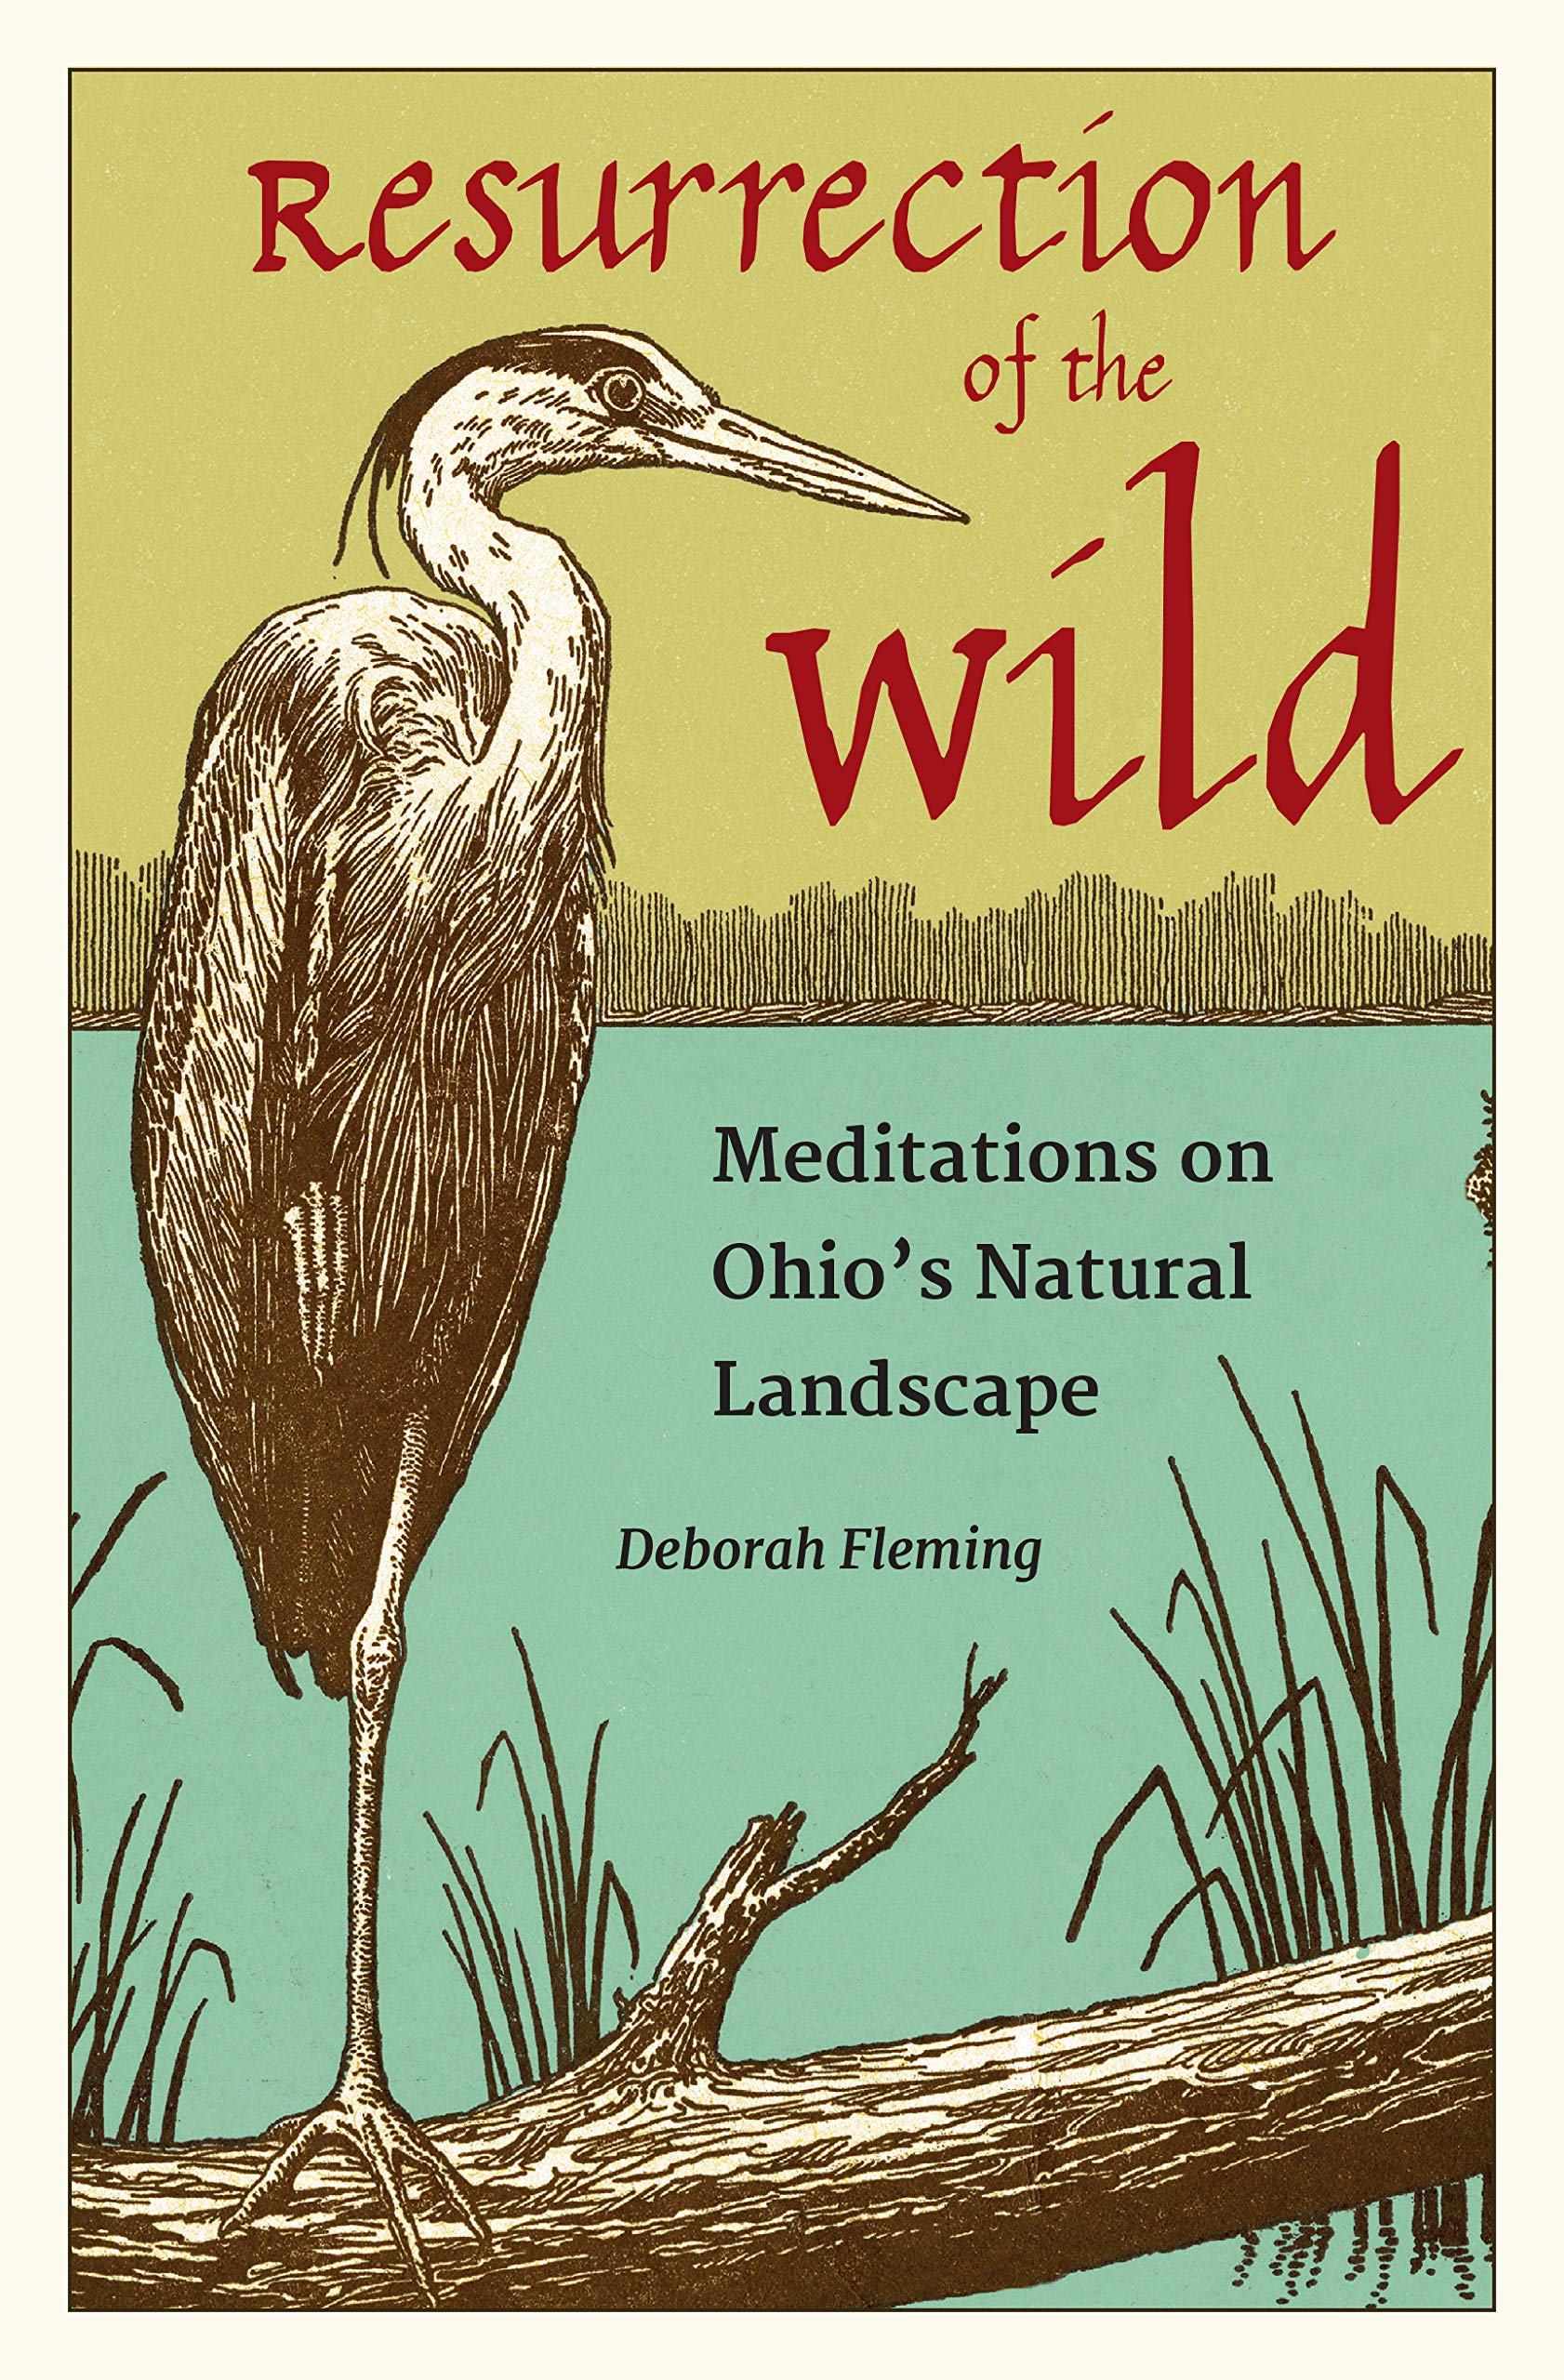 Q&A with Dr. Deborah Fleming, author of “Resurrection of the Wild:  Meditations on Ohio's Natural Landscape” – Heights Libraries